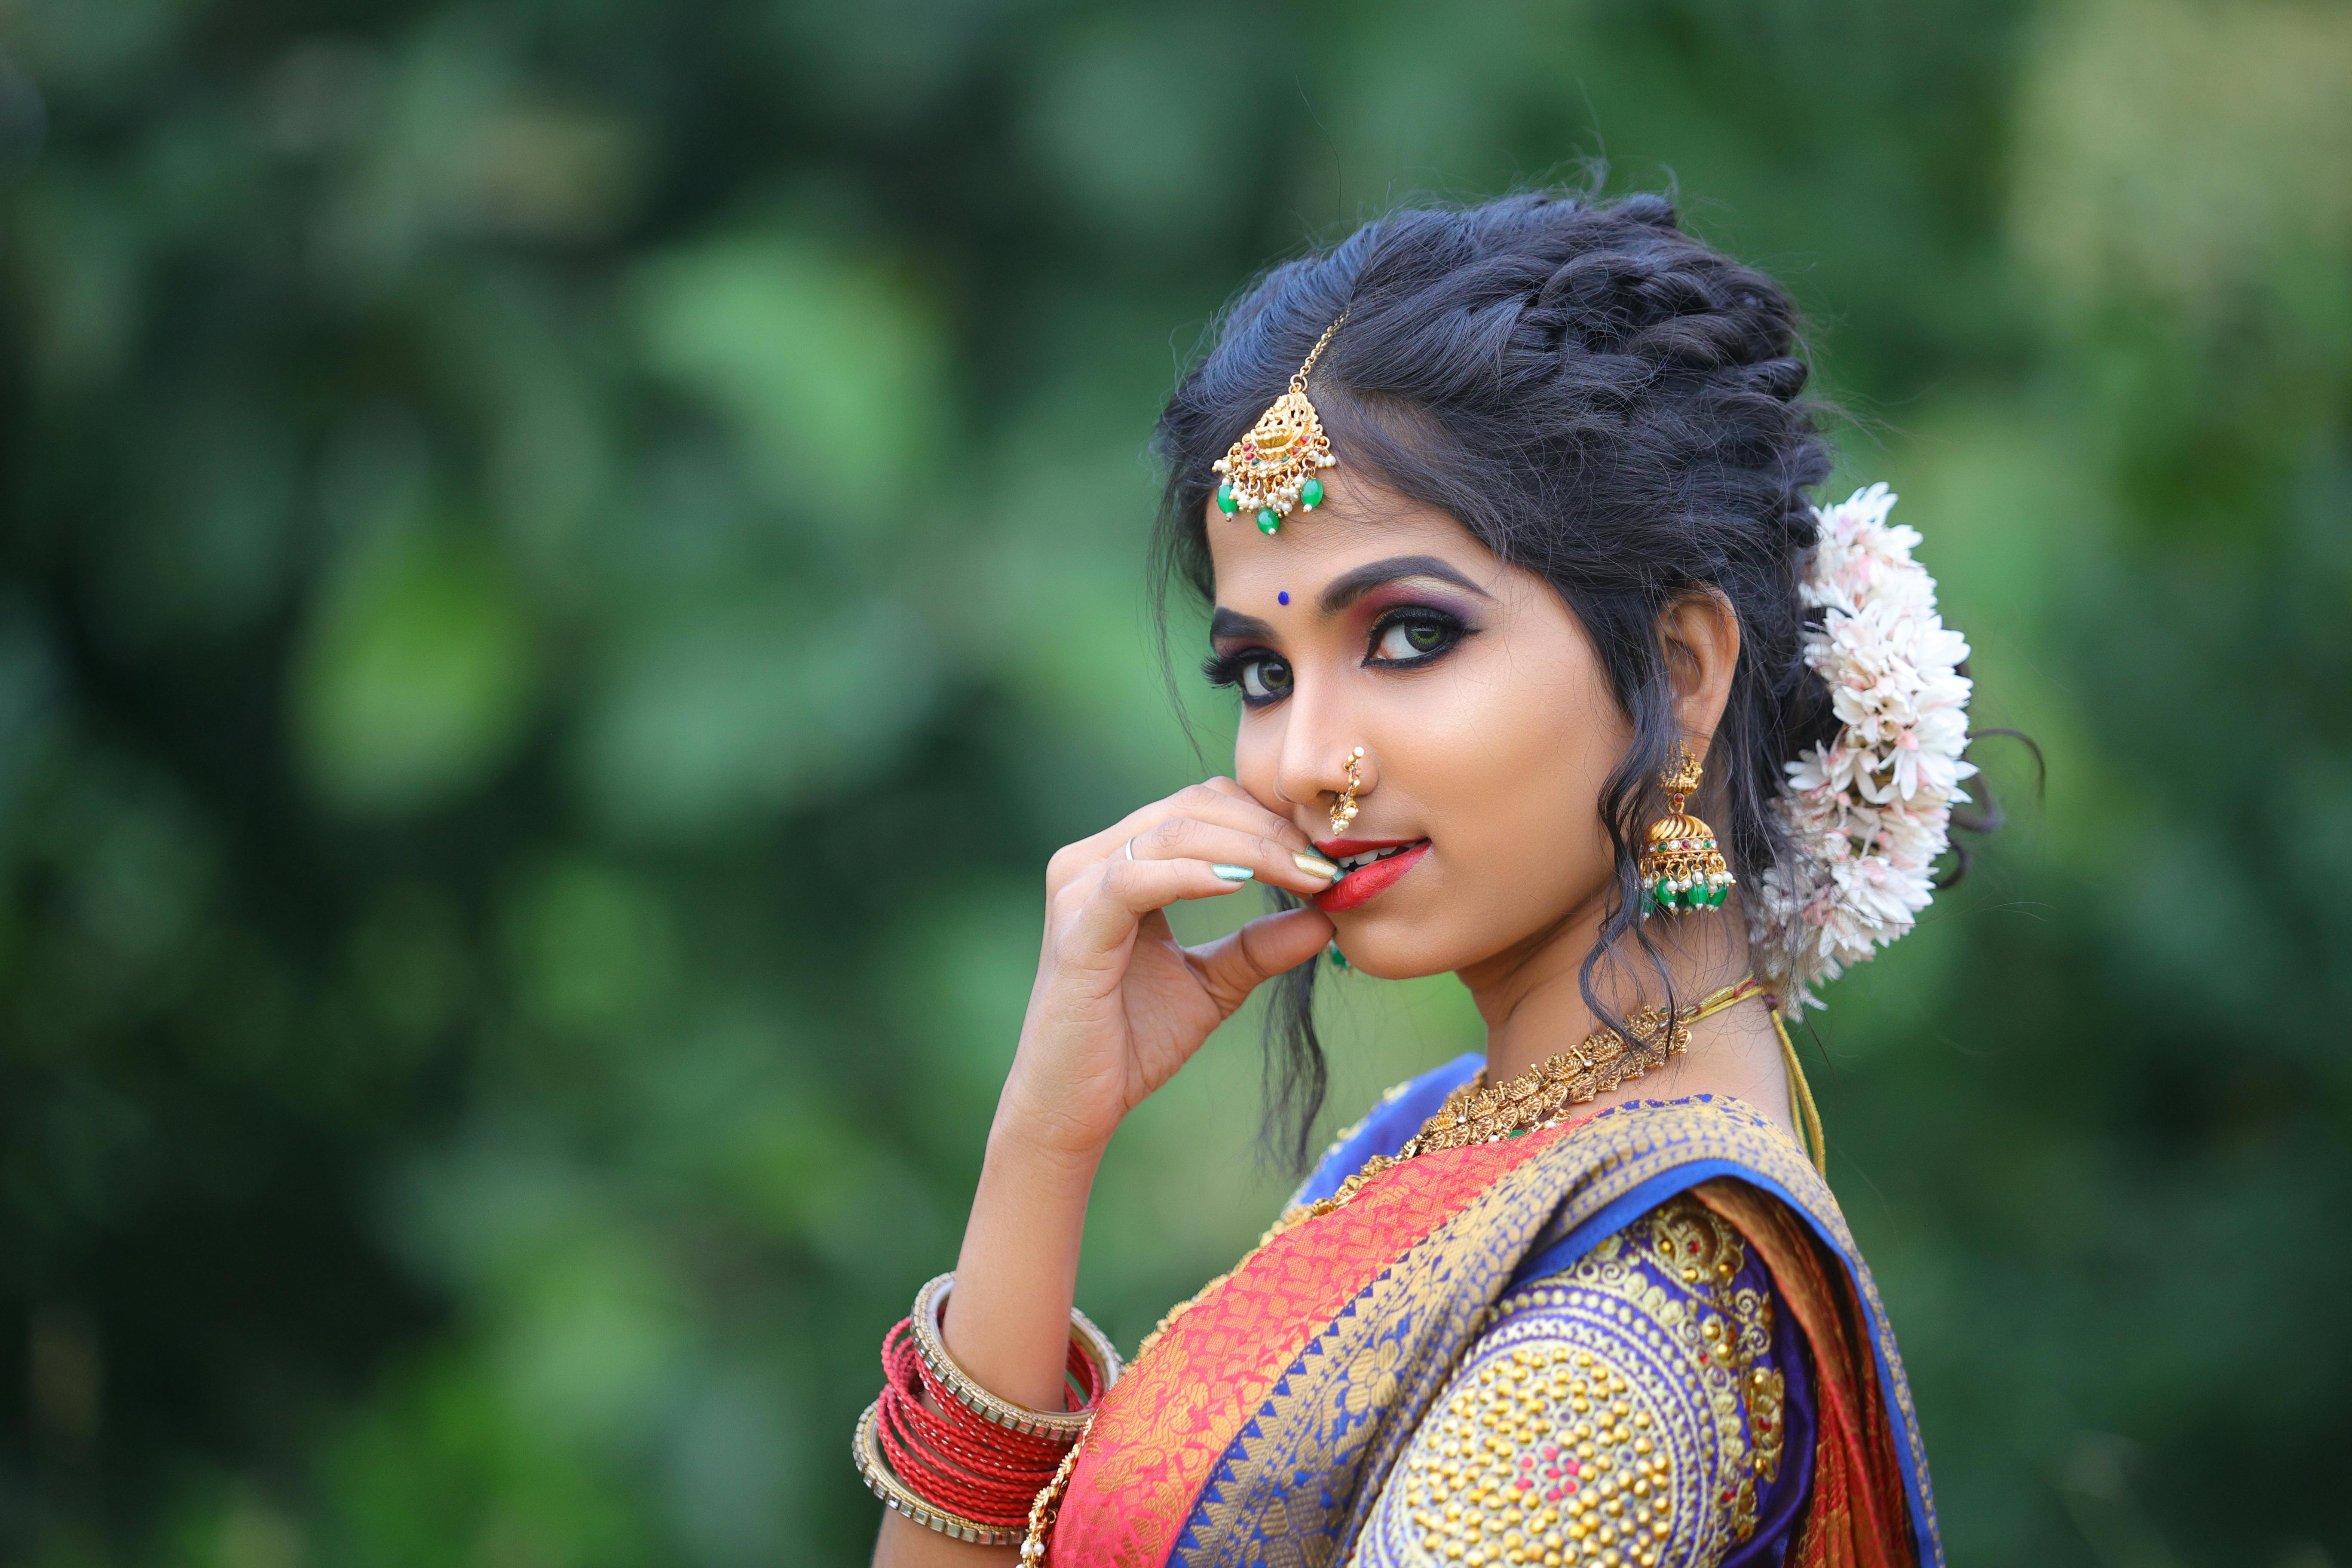 Free Photos - Three Indian Women, Elaborately Dressed And Wearing  Traditional Indian Clothing. They Are Heavily Adorned With Gold Jewelry,  Showcasing Their Cultural Heritage And Beauty. The Photo Captures The  Essence Of